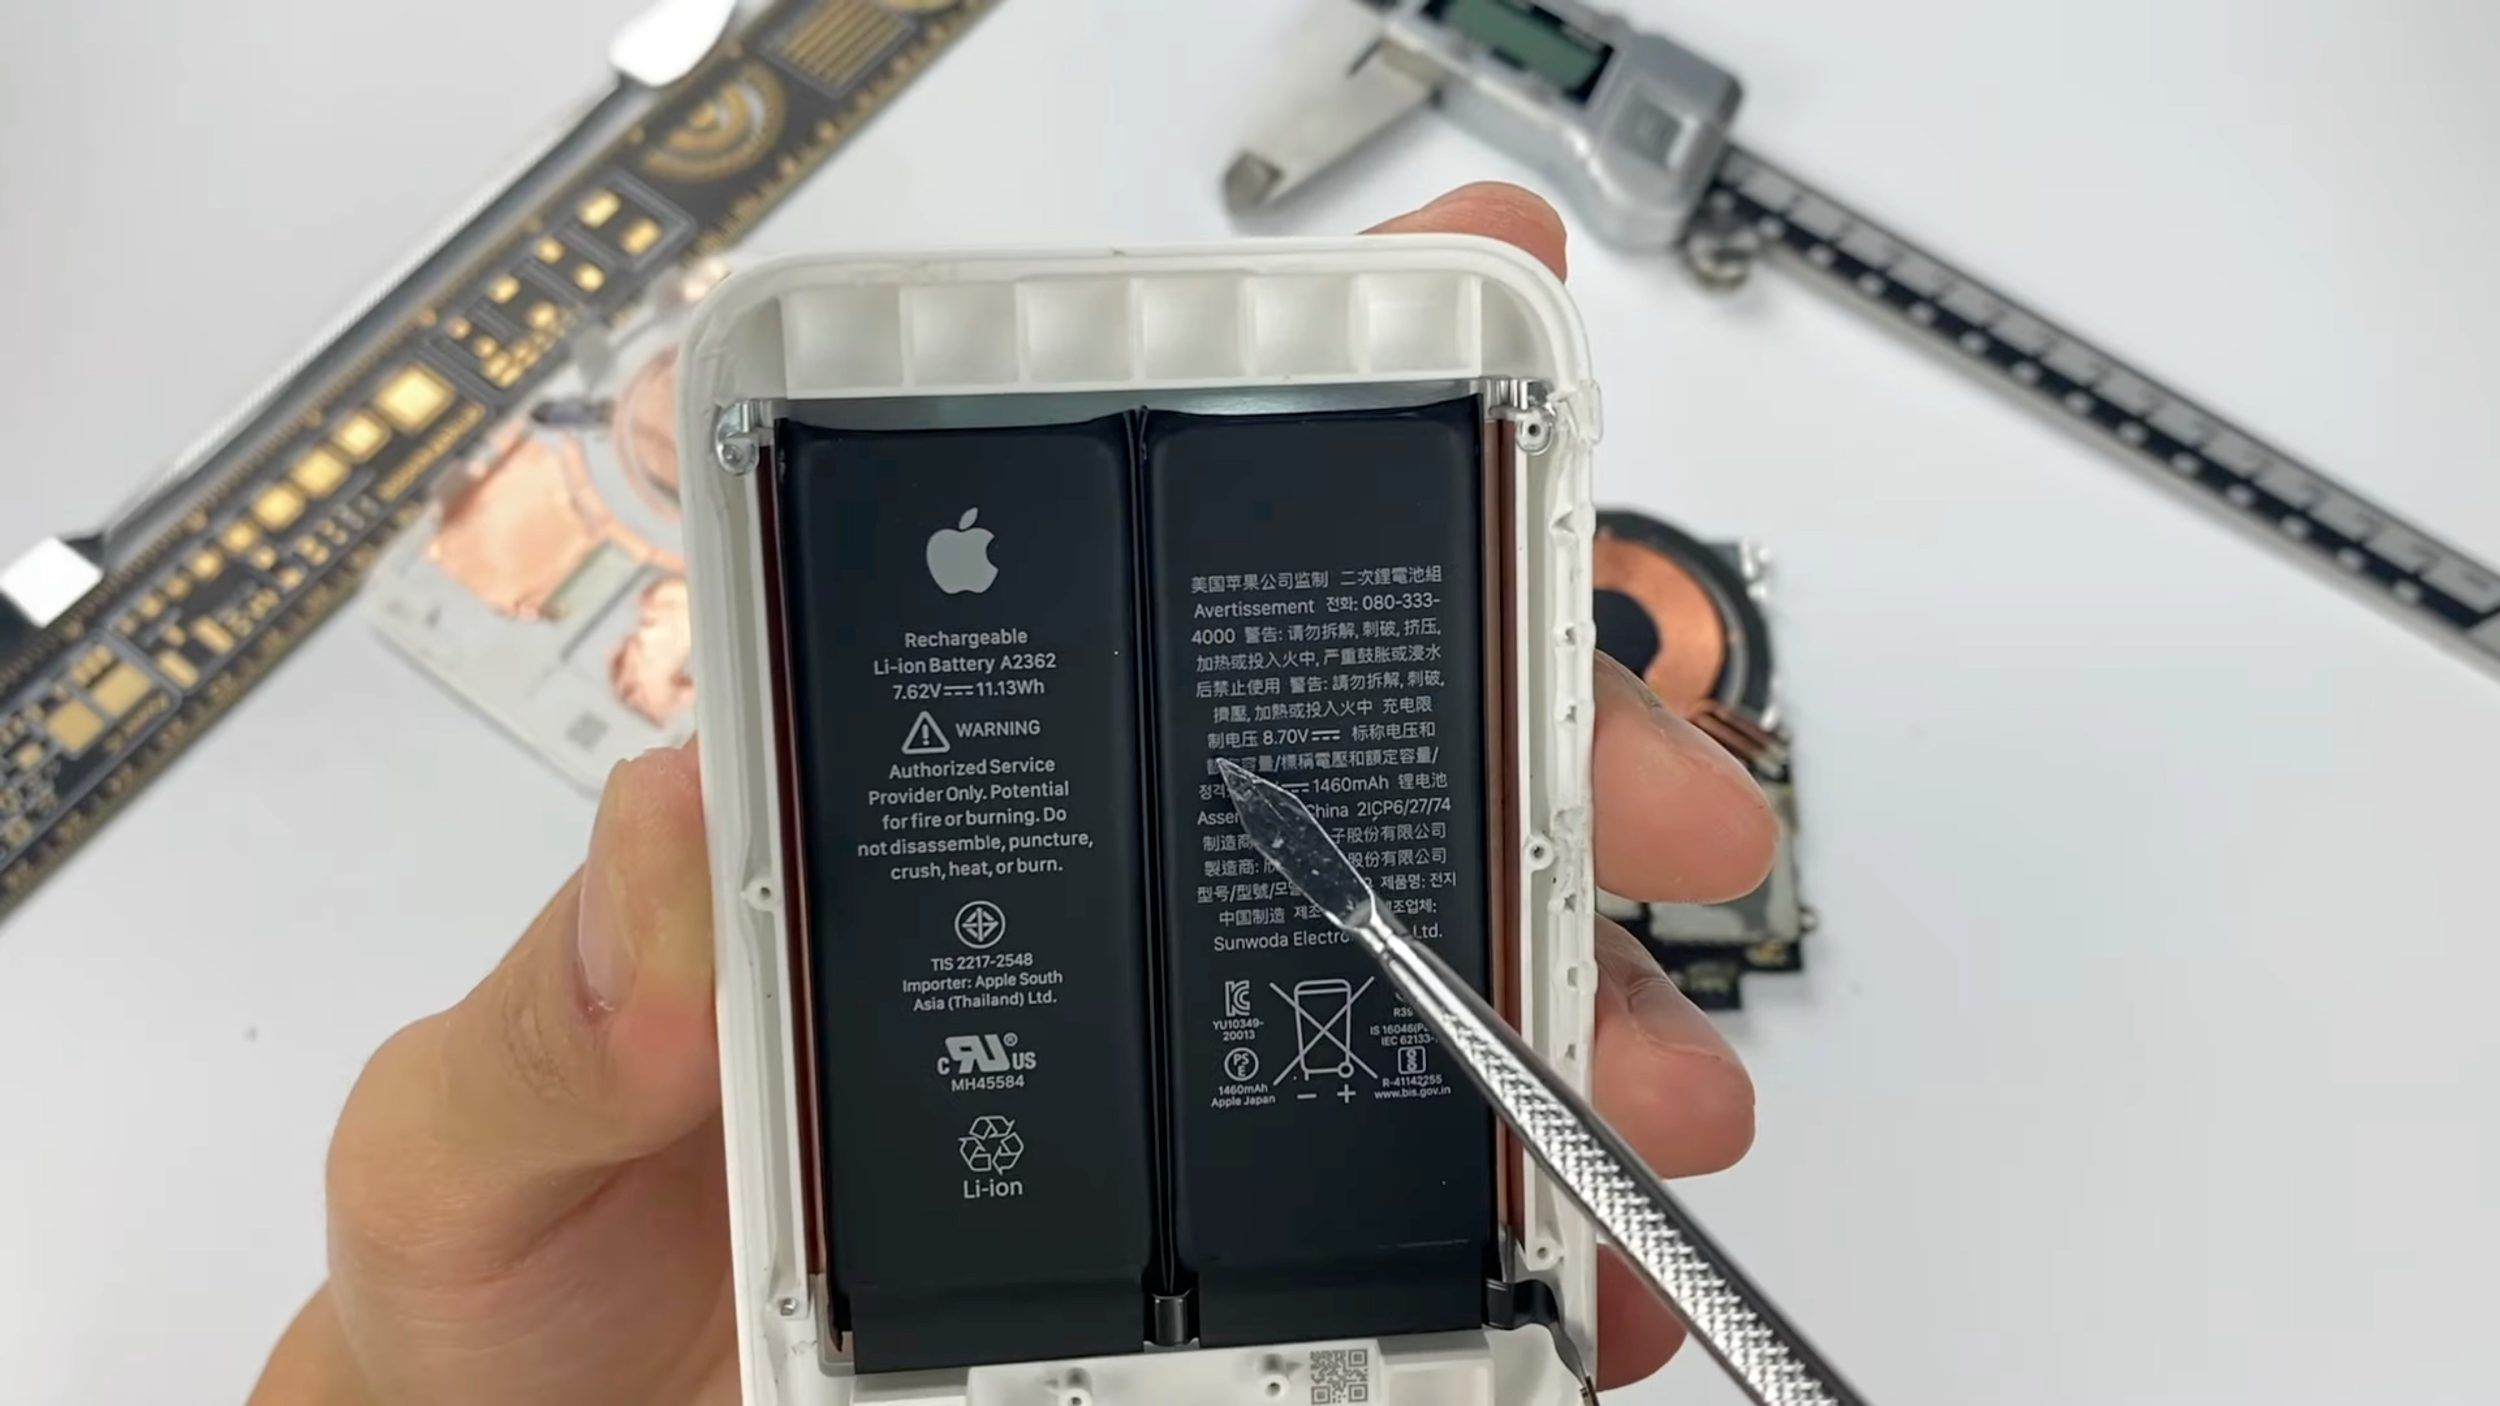 MagSafe Battery Pack Teardown Reveals Internal Design With Two-cell Battery